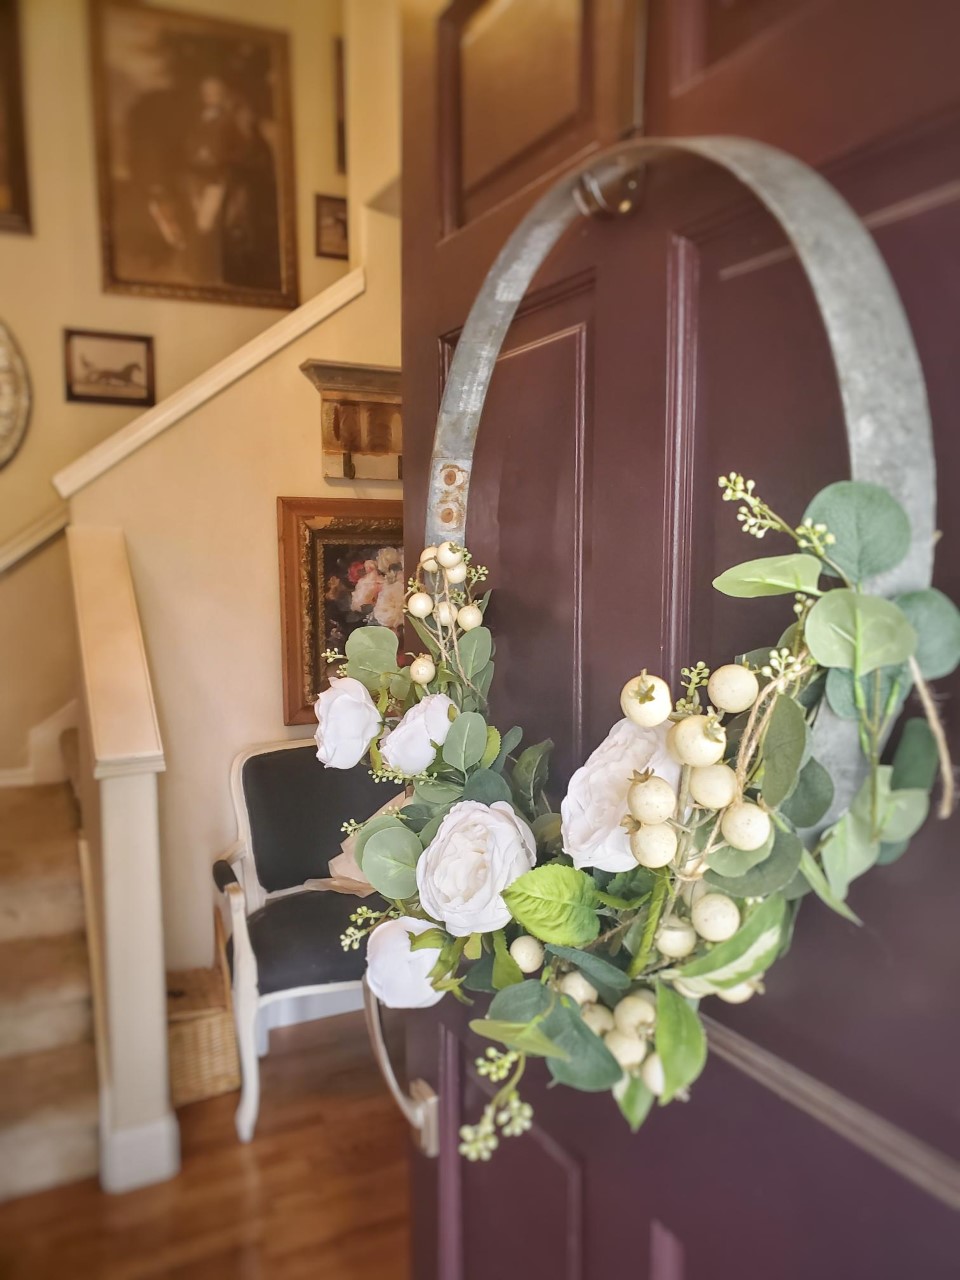 Tutorial on How to Make a Barrel Ring Wreath for Spring